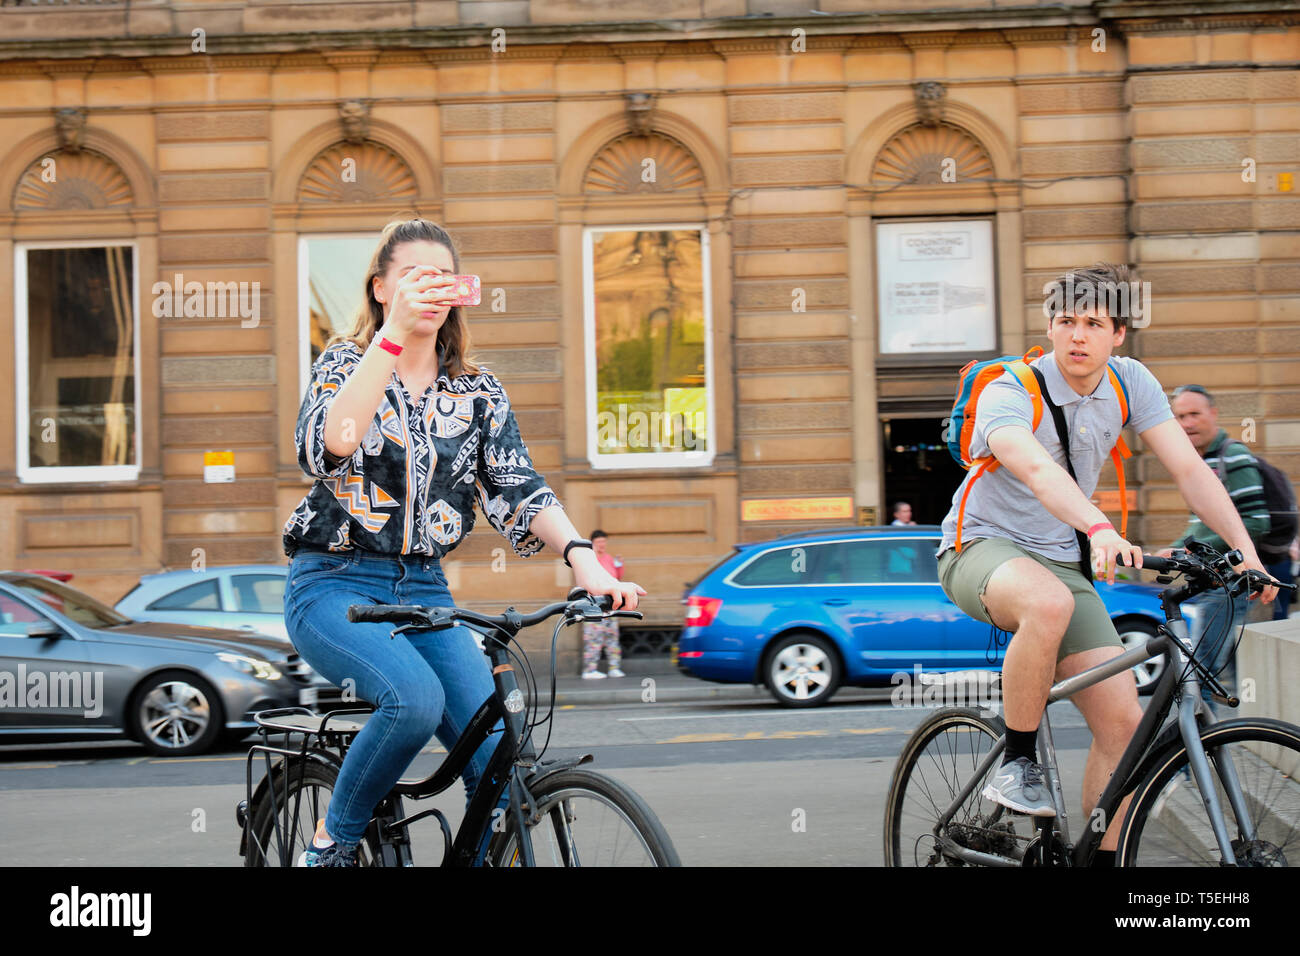 The girl with the phone goes on a bike Glasgow on 21 April 2019 Stock Photo